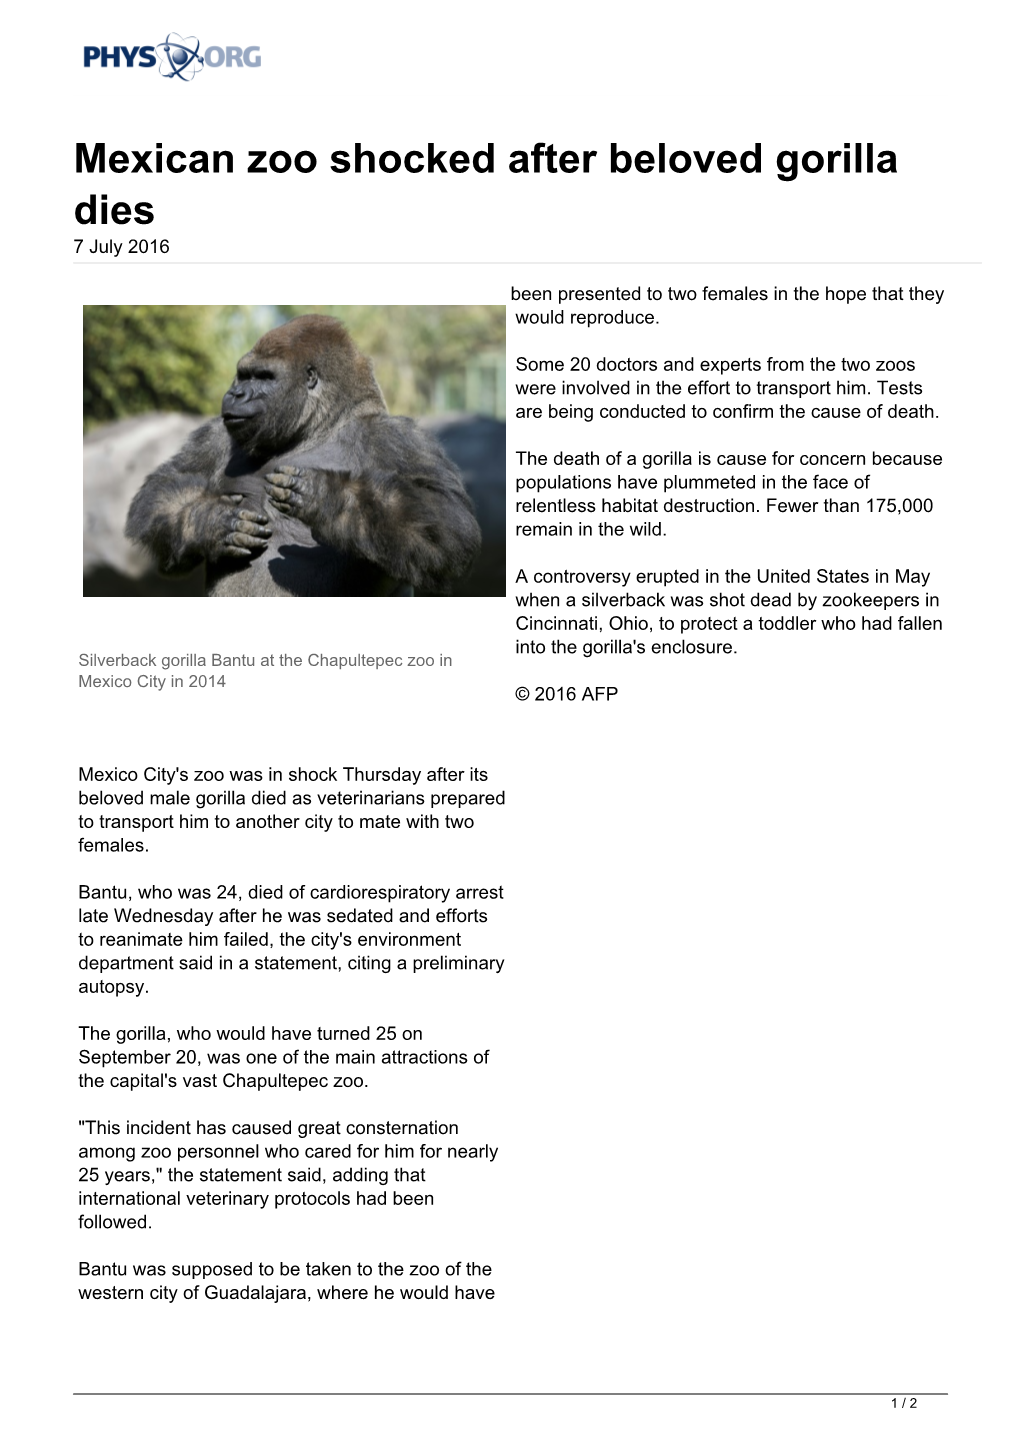 Mexican Zoo Shocked After Beloved Gorilla Dies 7 July 2016